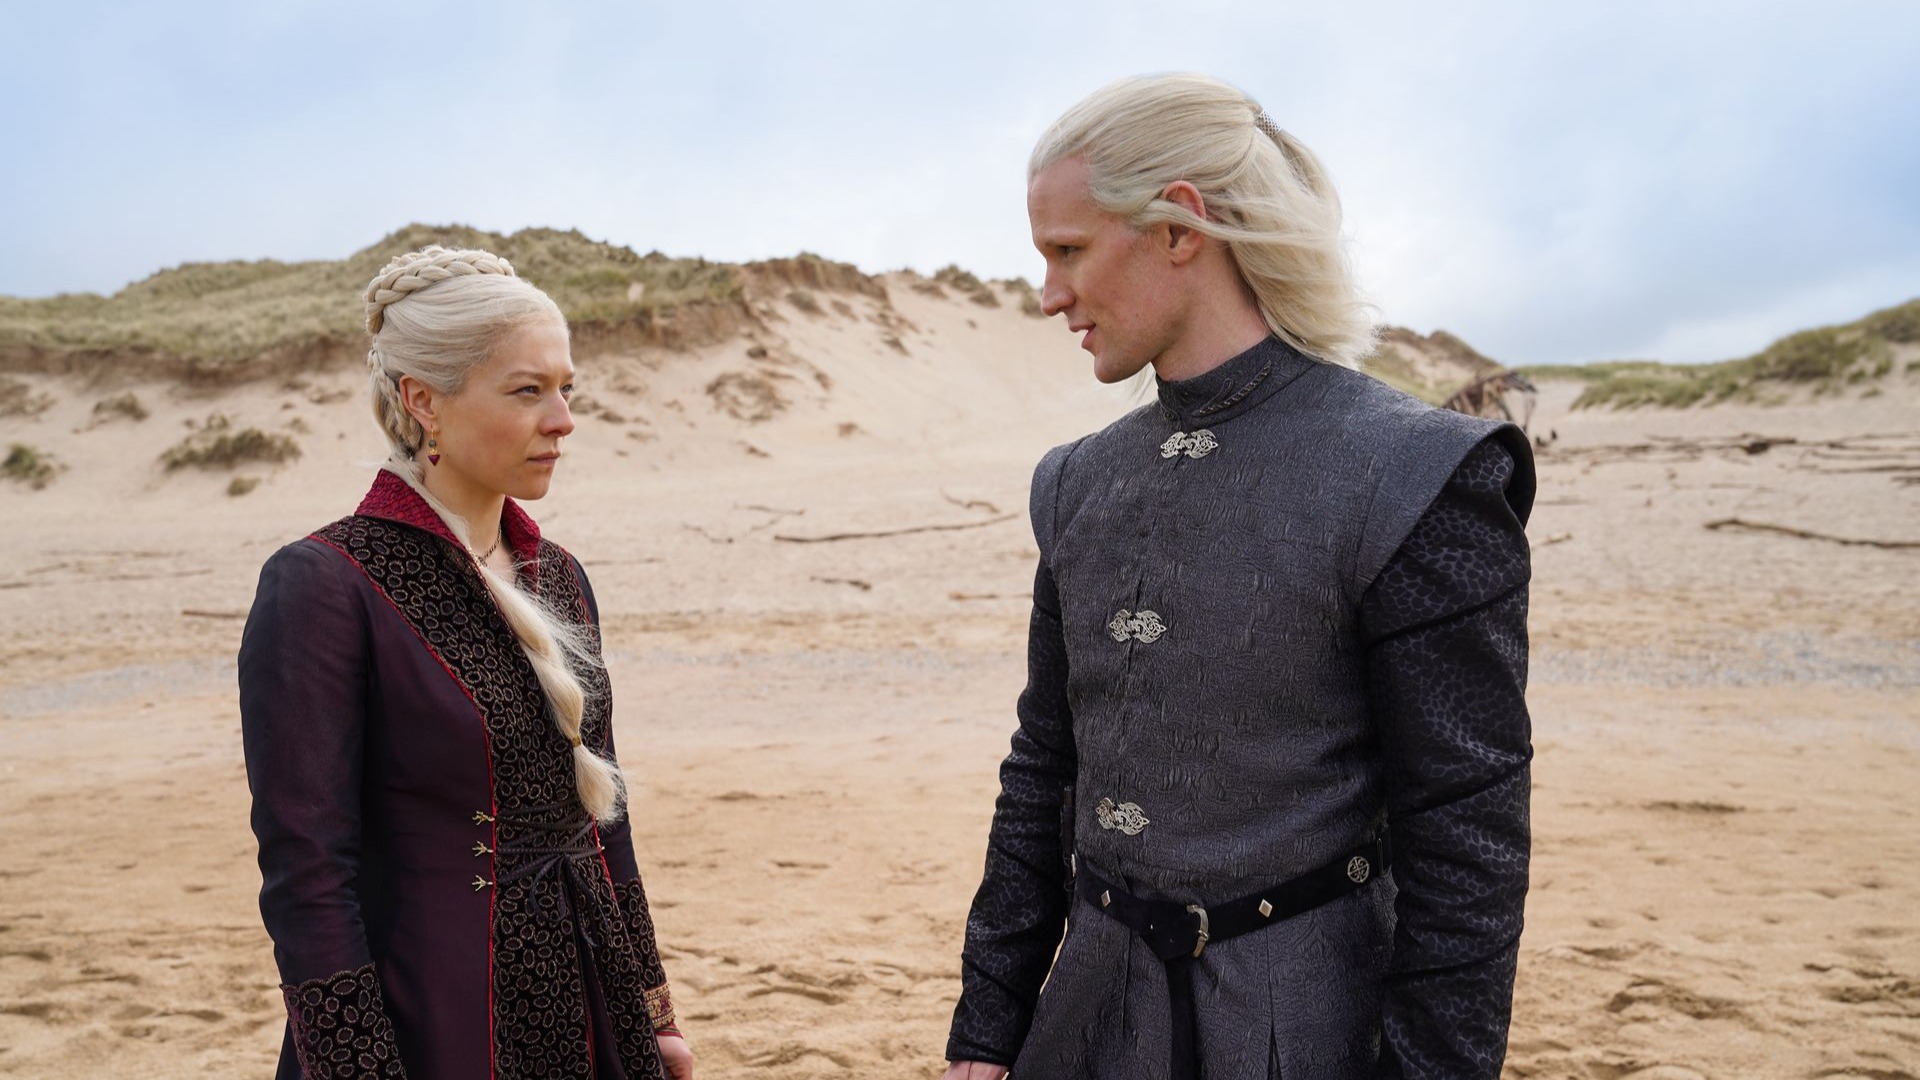 Rhaenyra and Daemon Targaryen chat on a beach in House of the Dragon on HBO Max